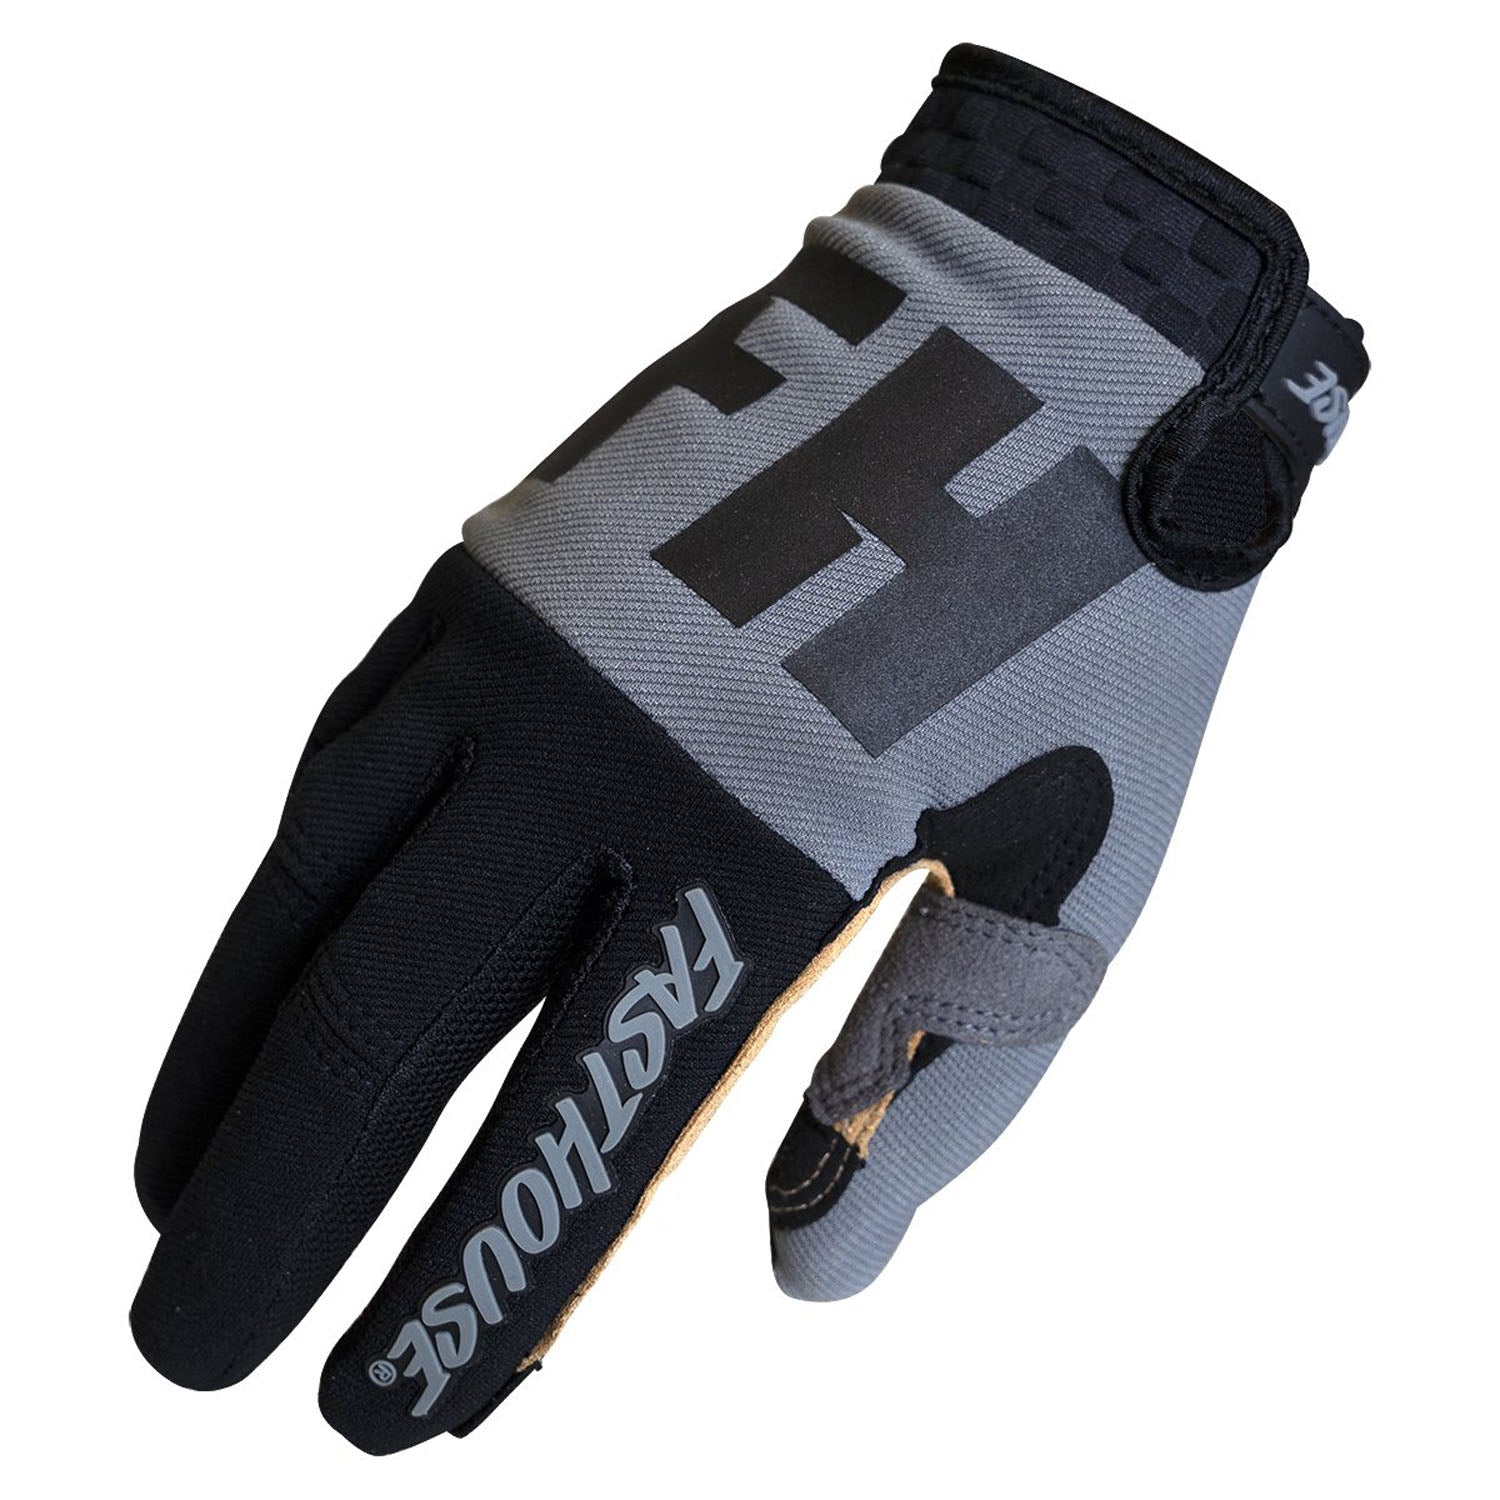 Fasthouse Speed Style Glove Remnant - Gray/Black Bike Gloves